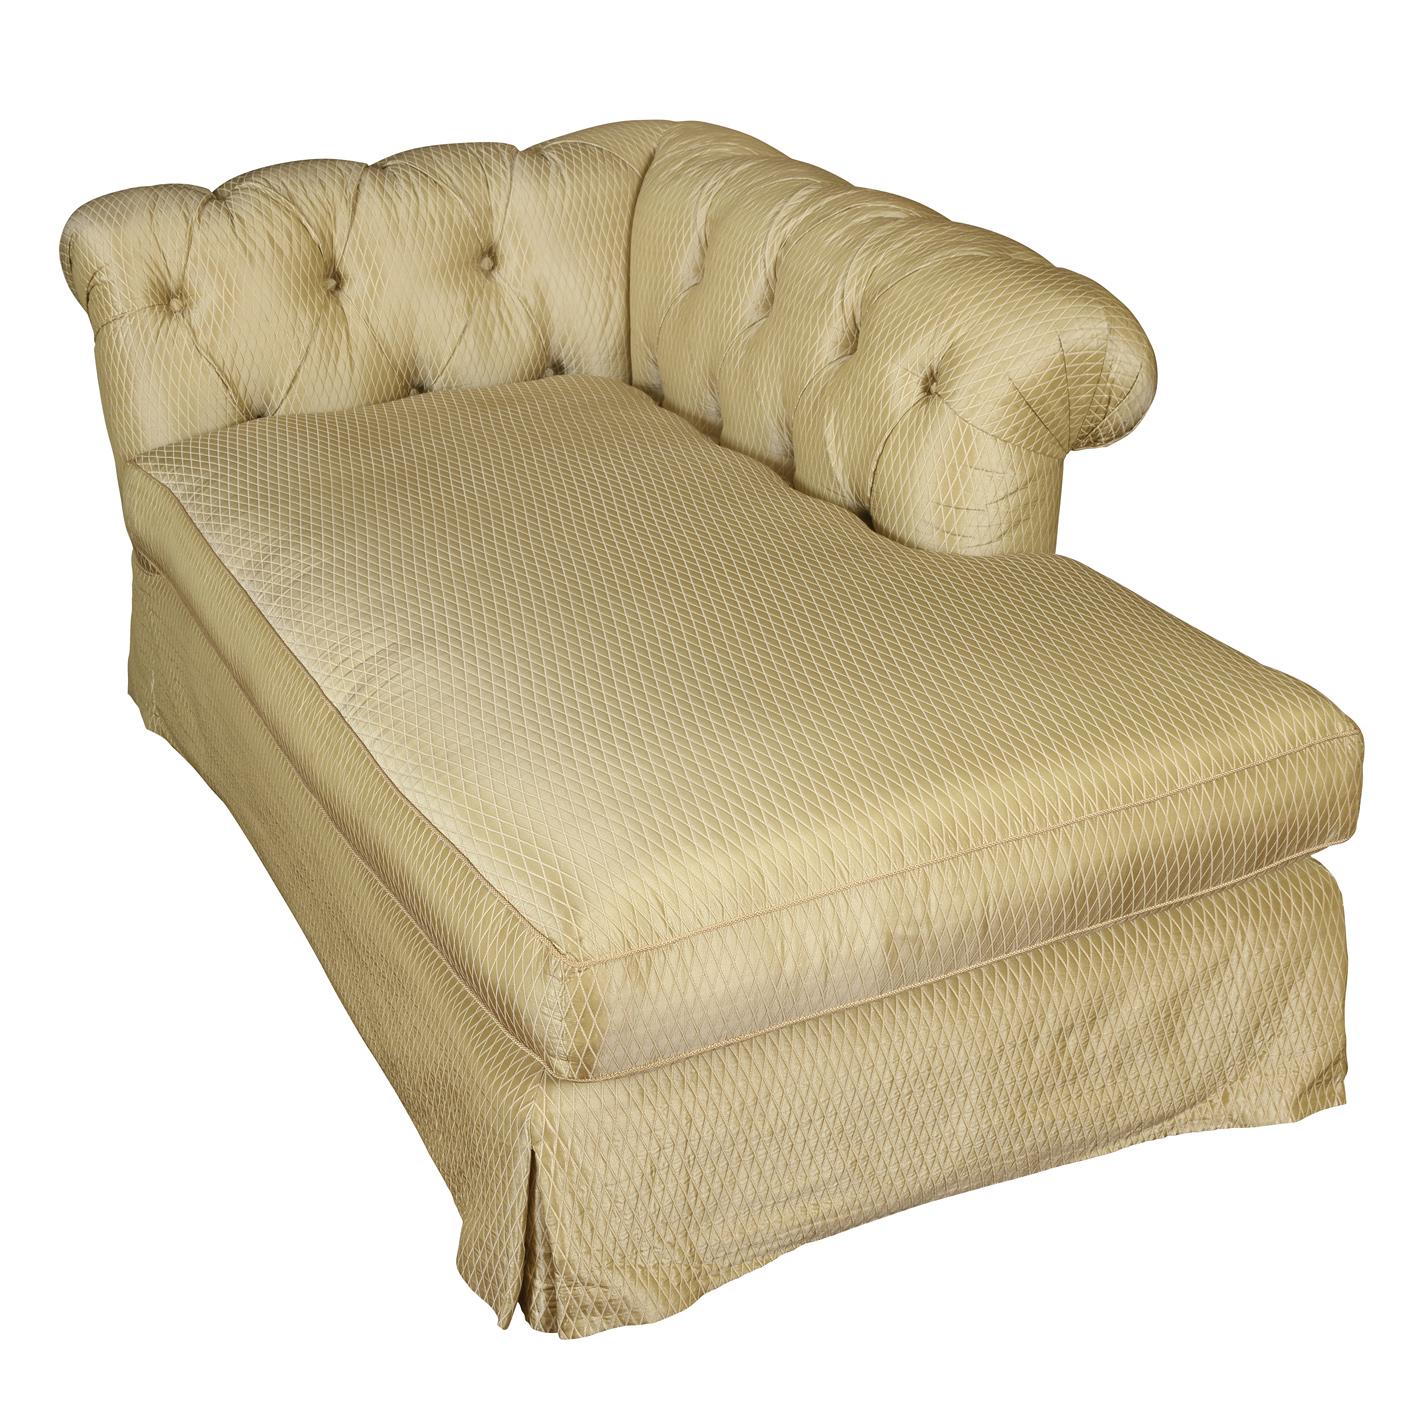 English upholstered tufted chaise with curved back in neutral diamond patterned fabric.